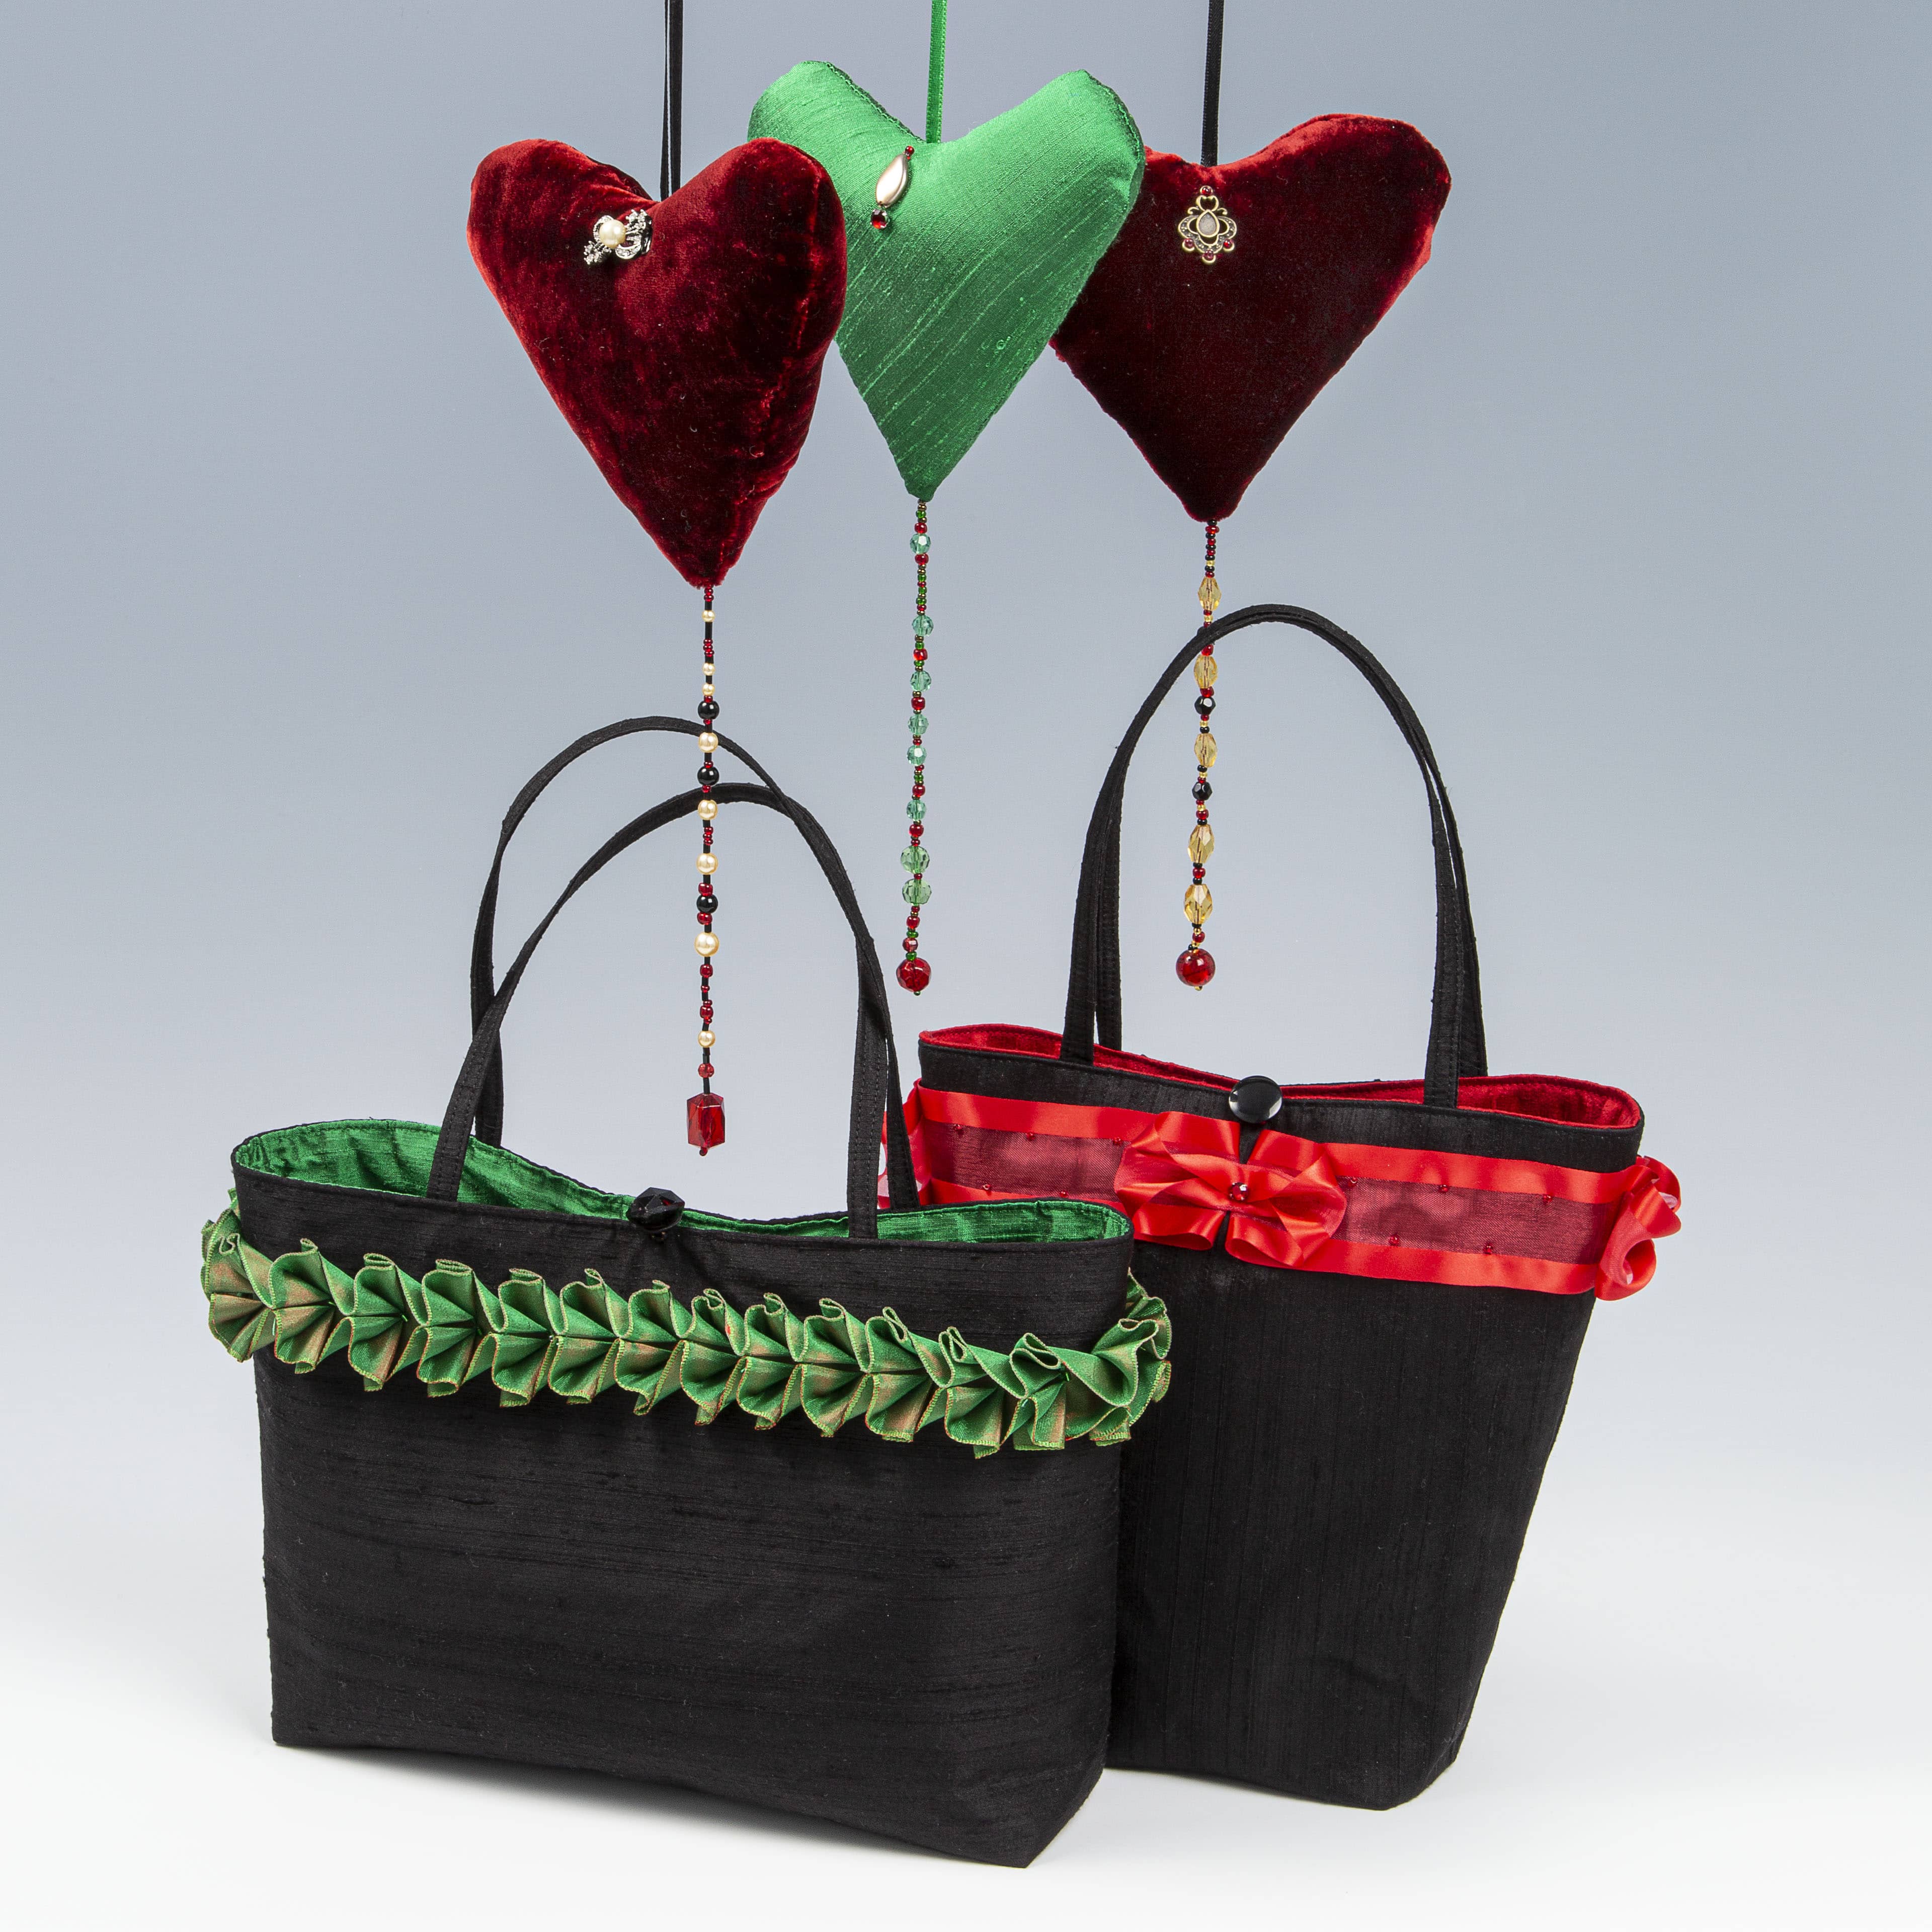 Handbags and hearts in red and green silks